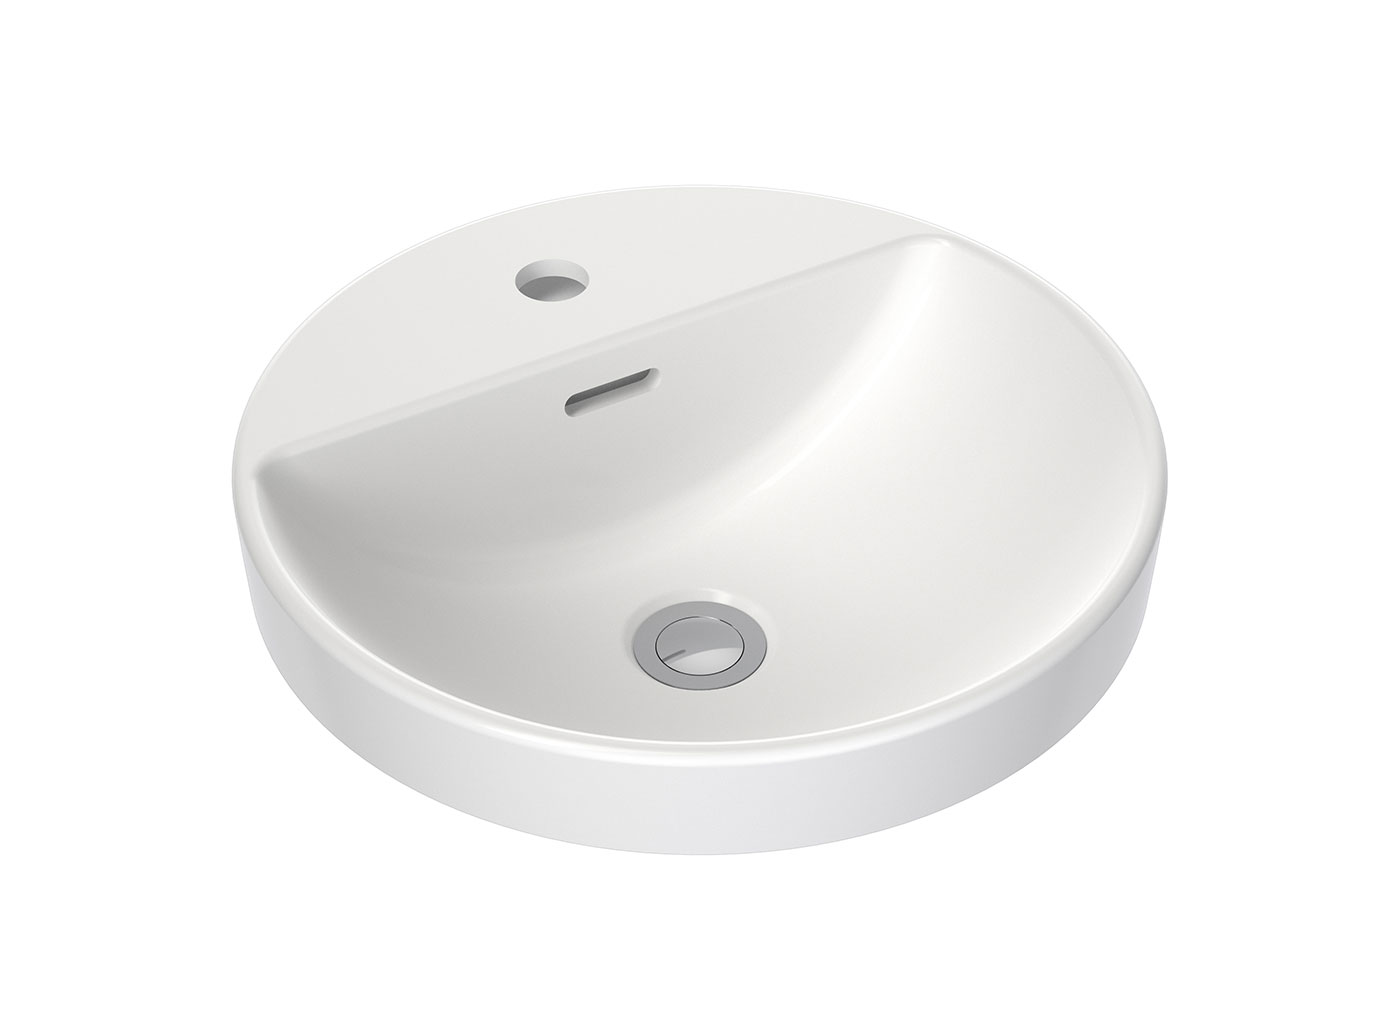 Loving round and compact? Clark's got the basin for you!